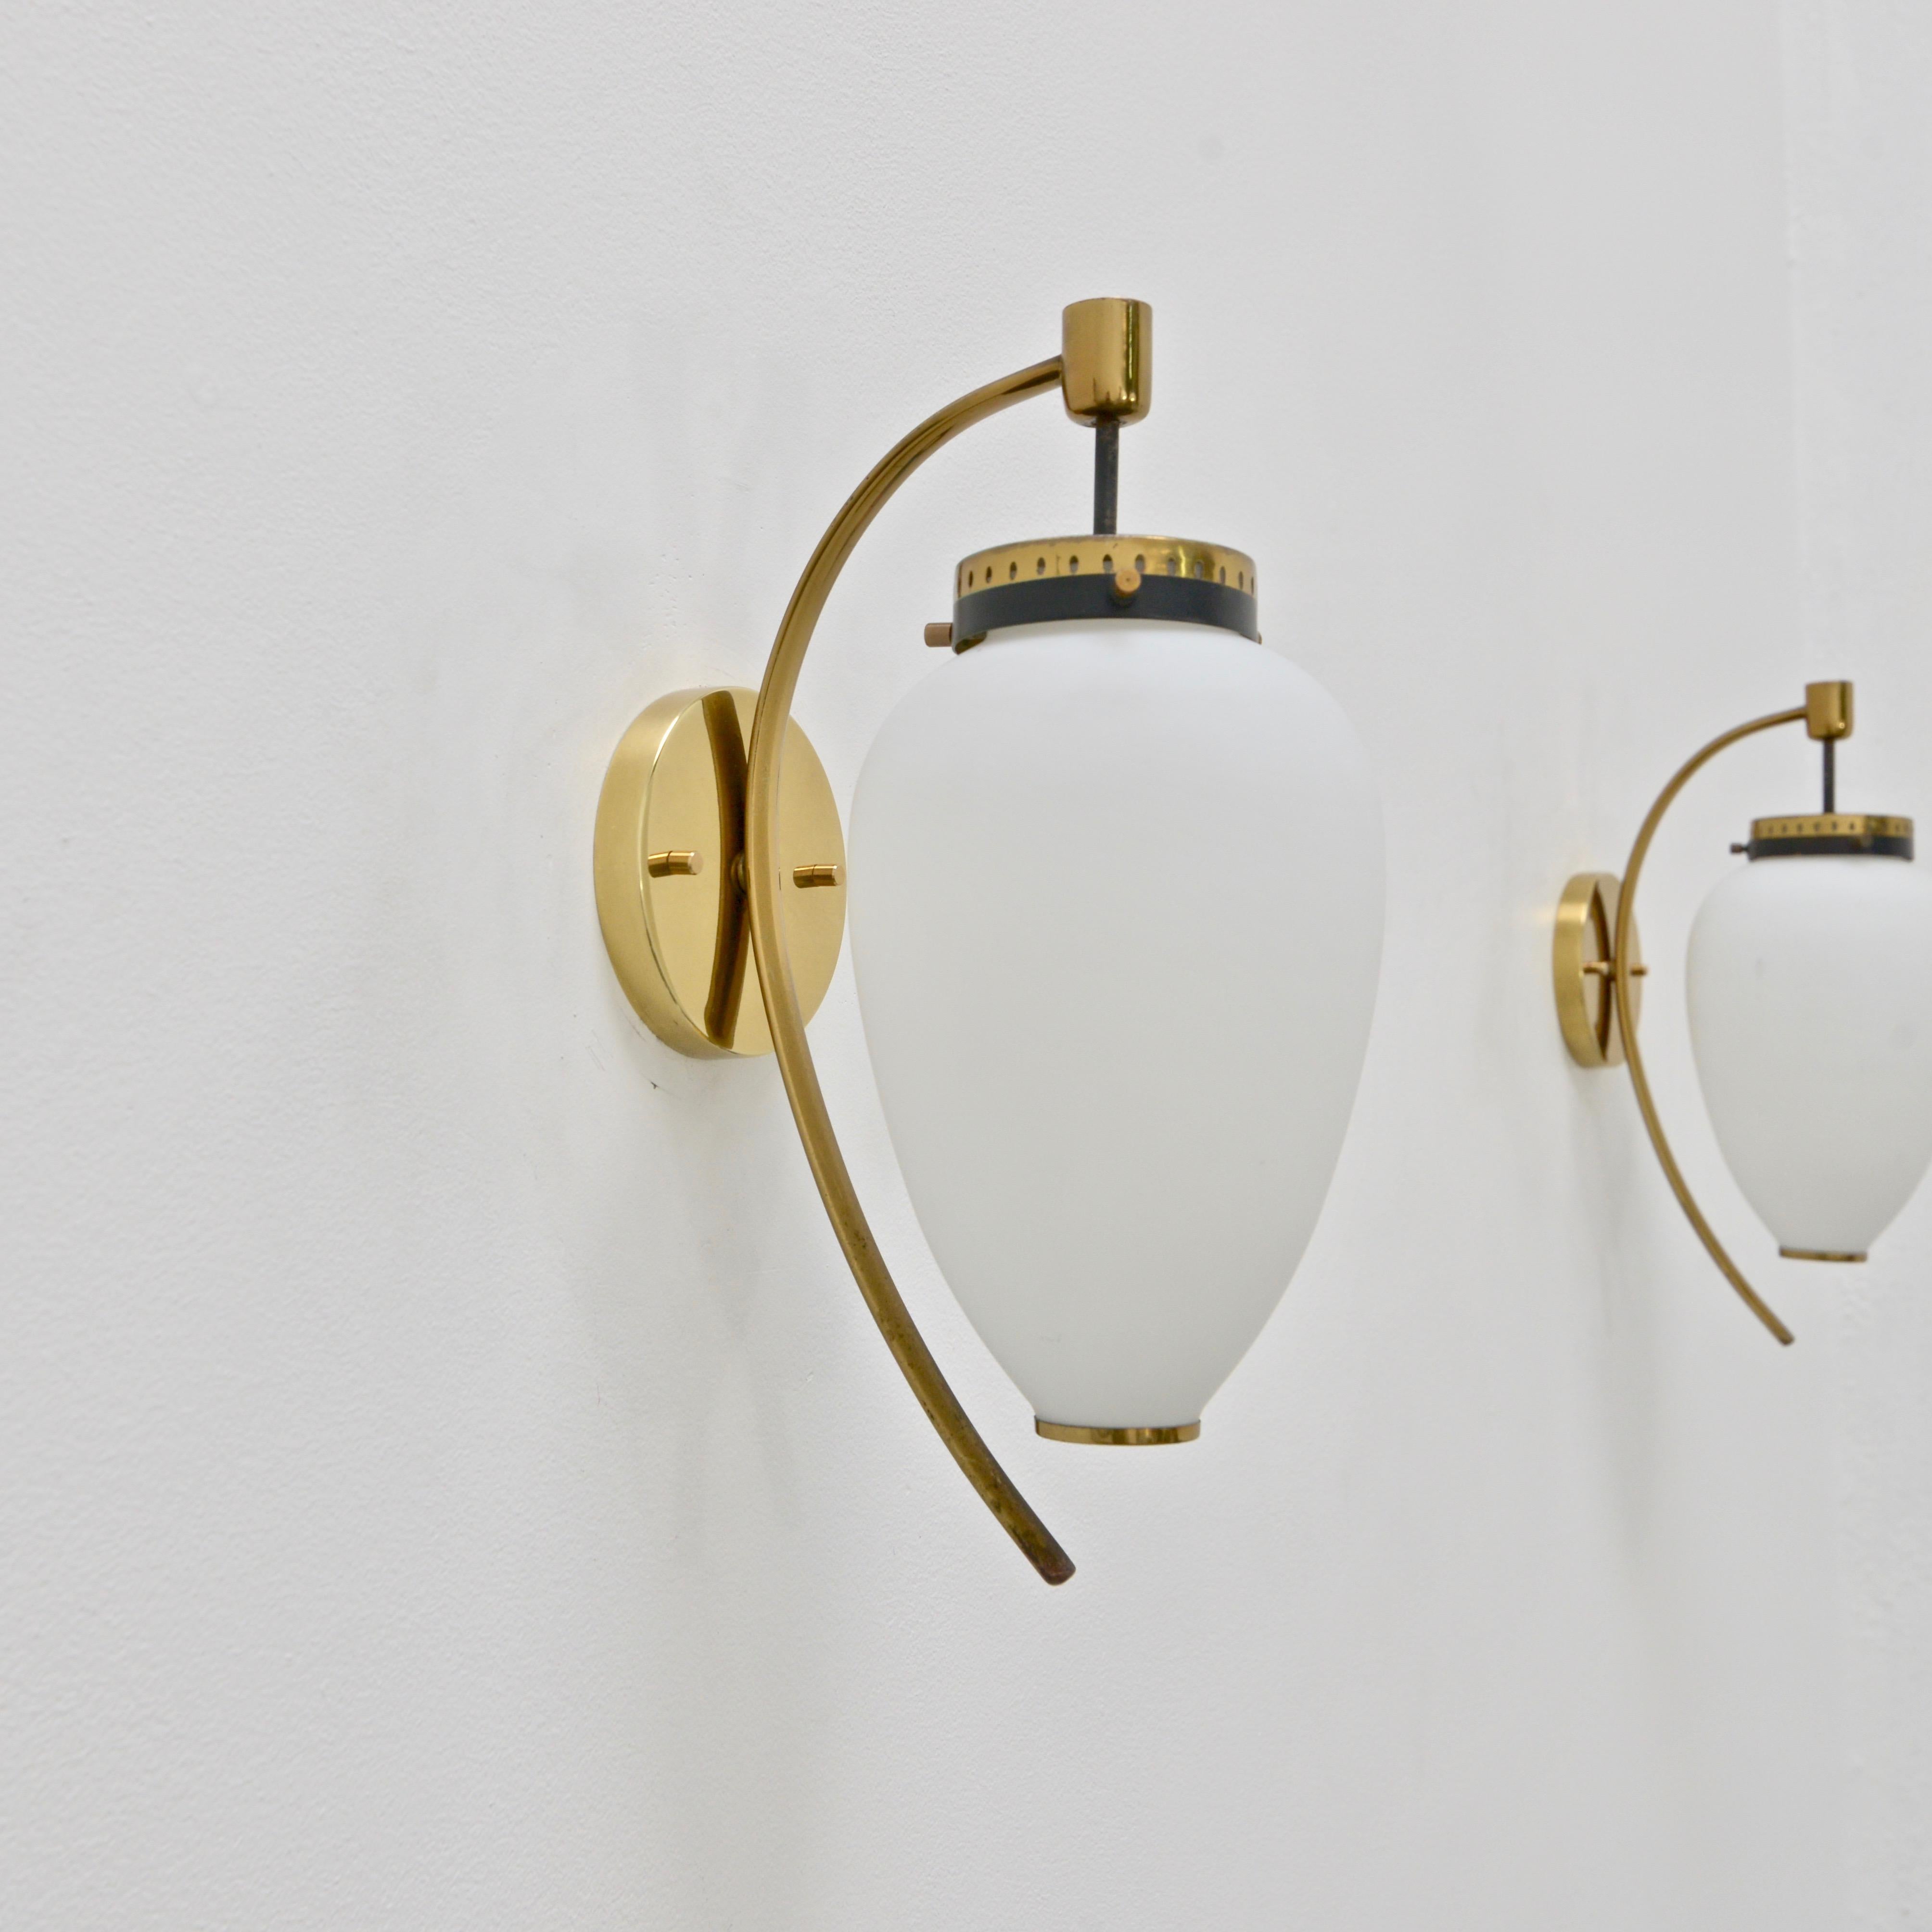 Vintage Italian Stilnovo sconces from the 1950s. In brass and glass. Naturally aged. Single E12 candelabra based socket per sconce. Priced individually. Wired for use in the US. Lightbulb included with order.
Measurements:
Height 13” 
Diameter